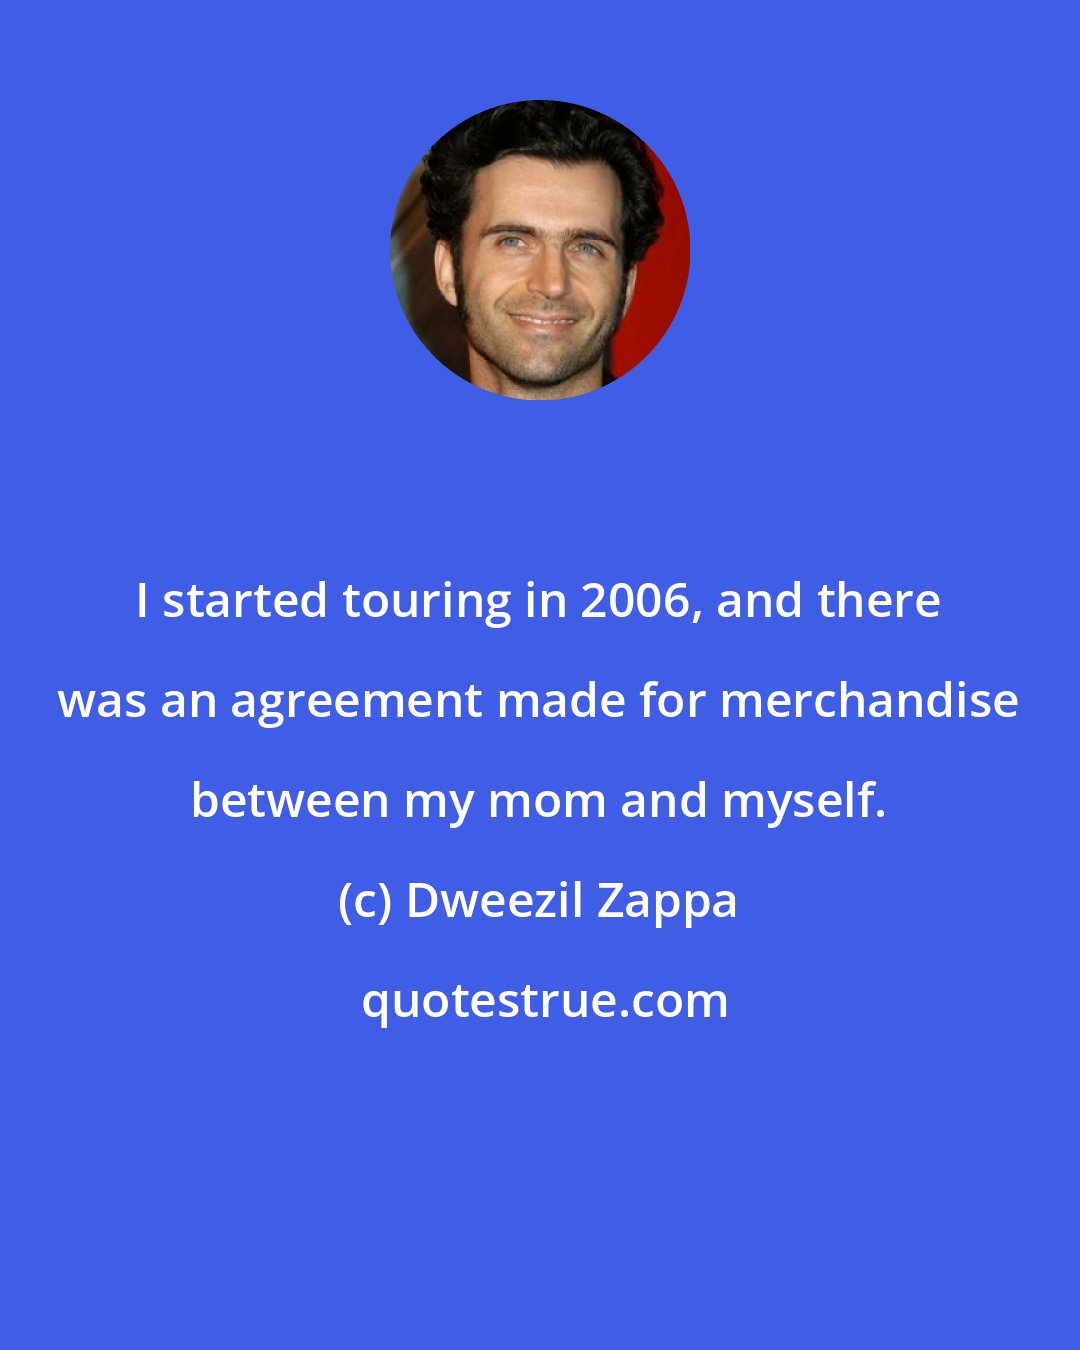 Dweezil Zappa: I started touring in 2006, and there was an agreement made for merchandise between my mom and myself.